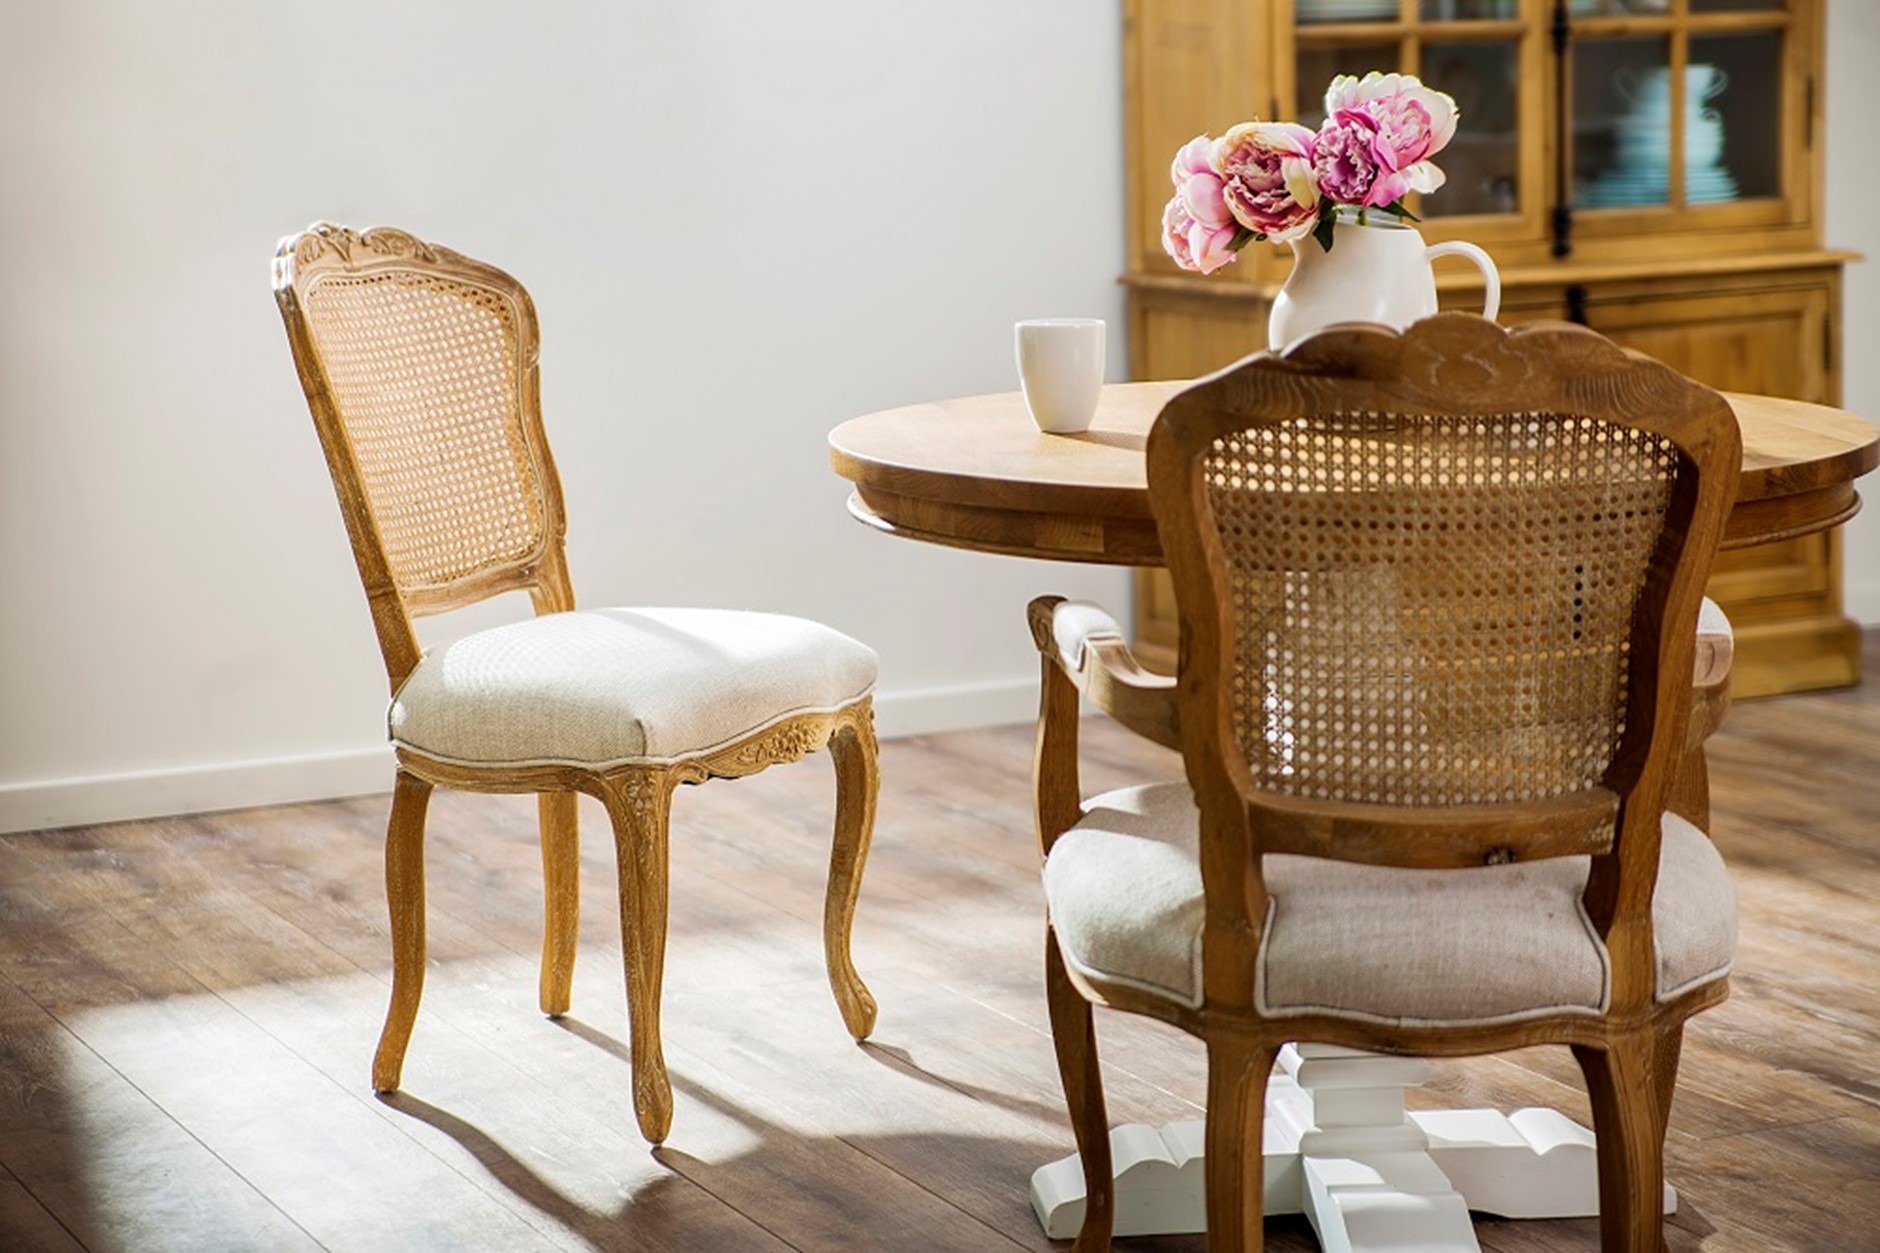 5 quick ways to decorate your dinning room table